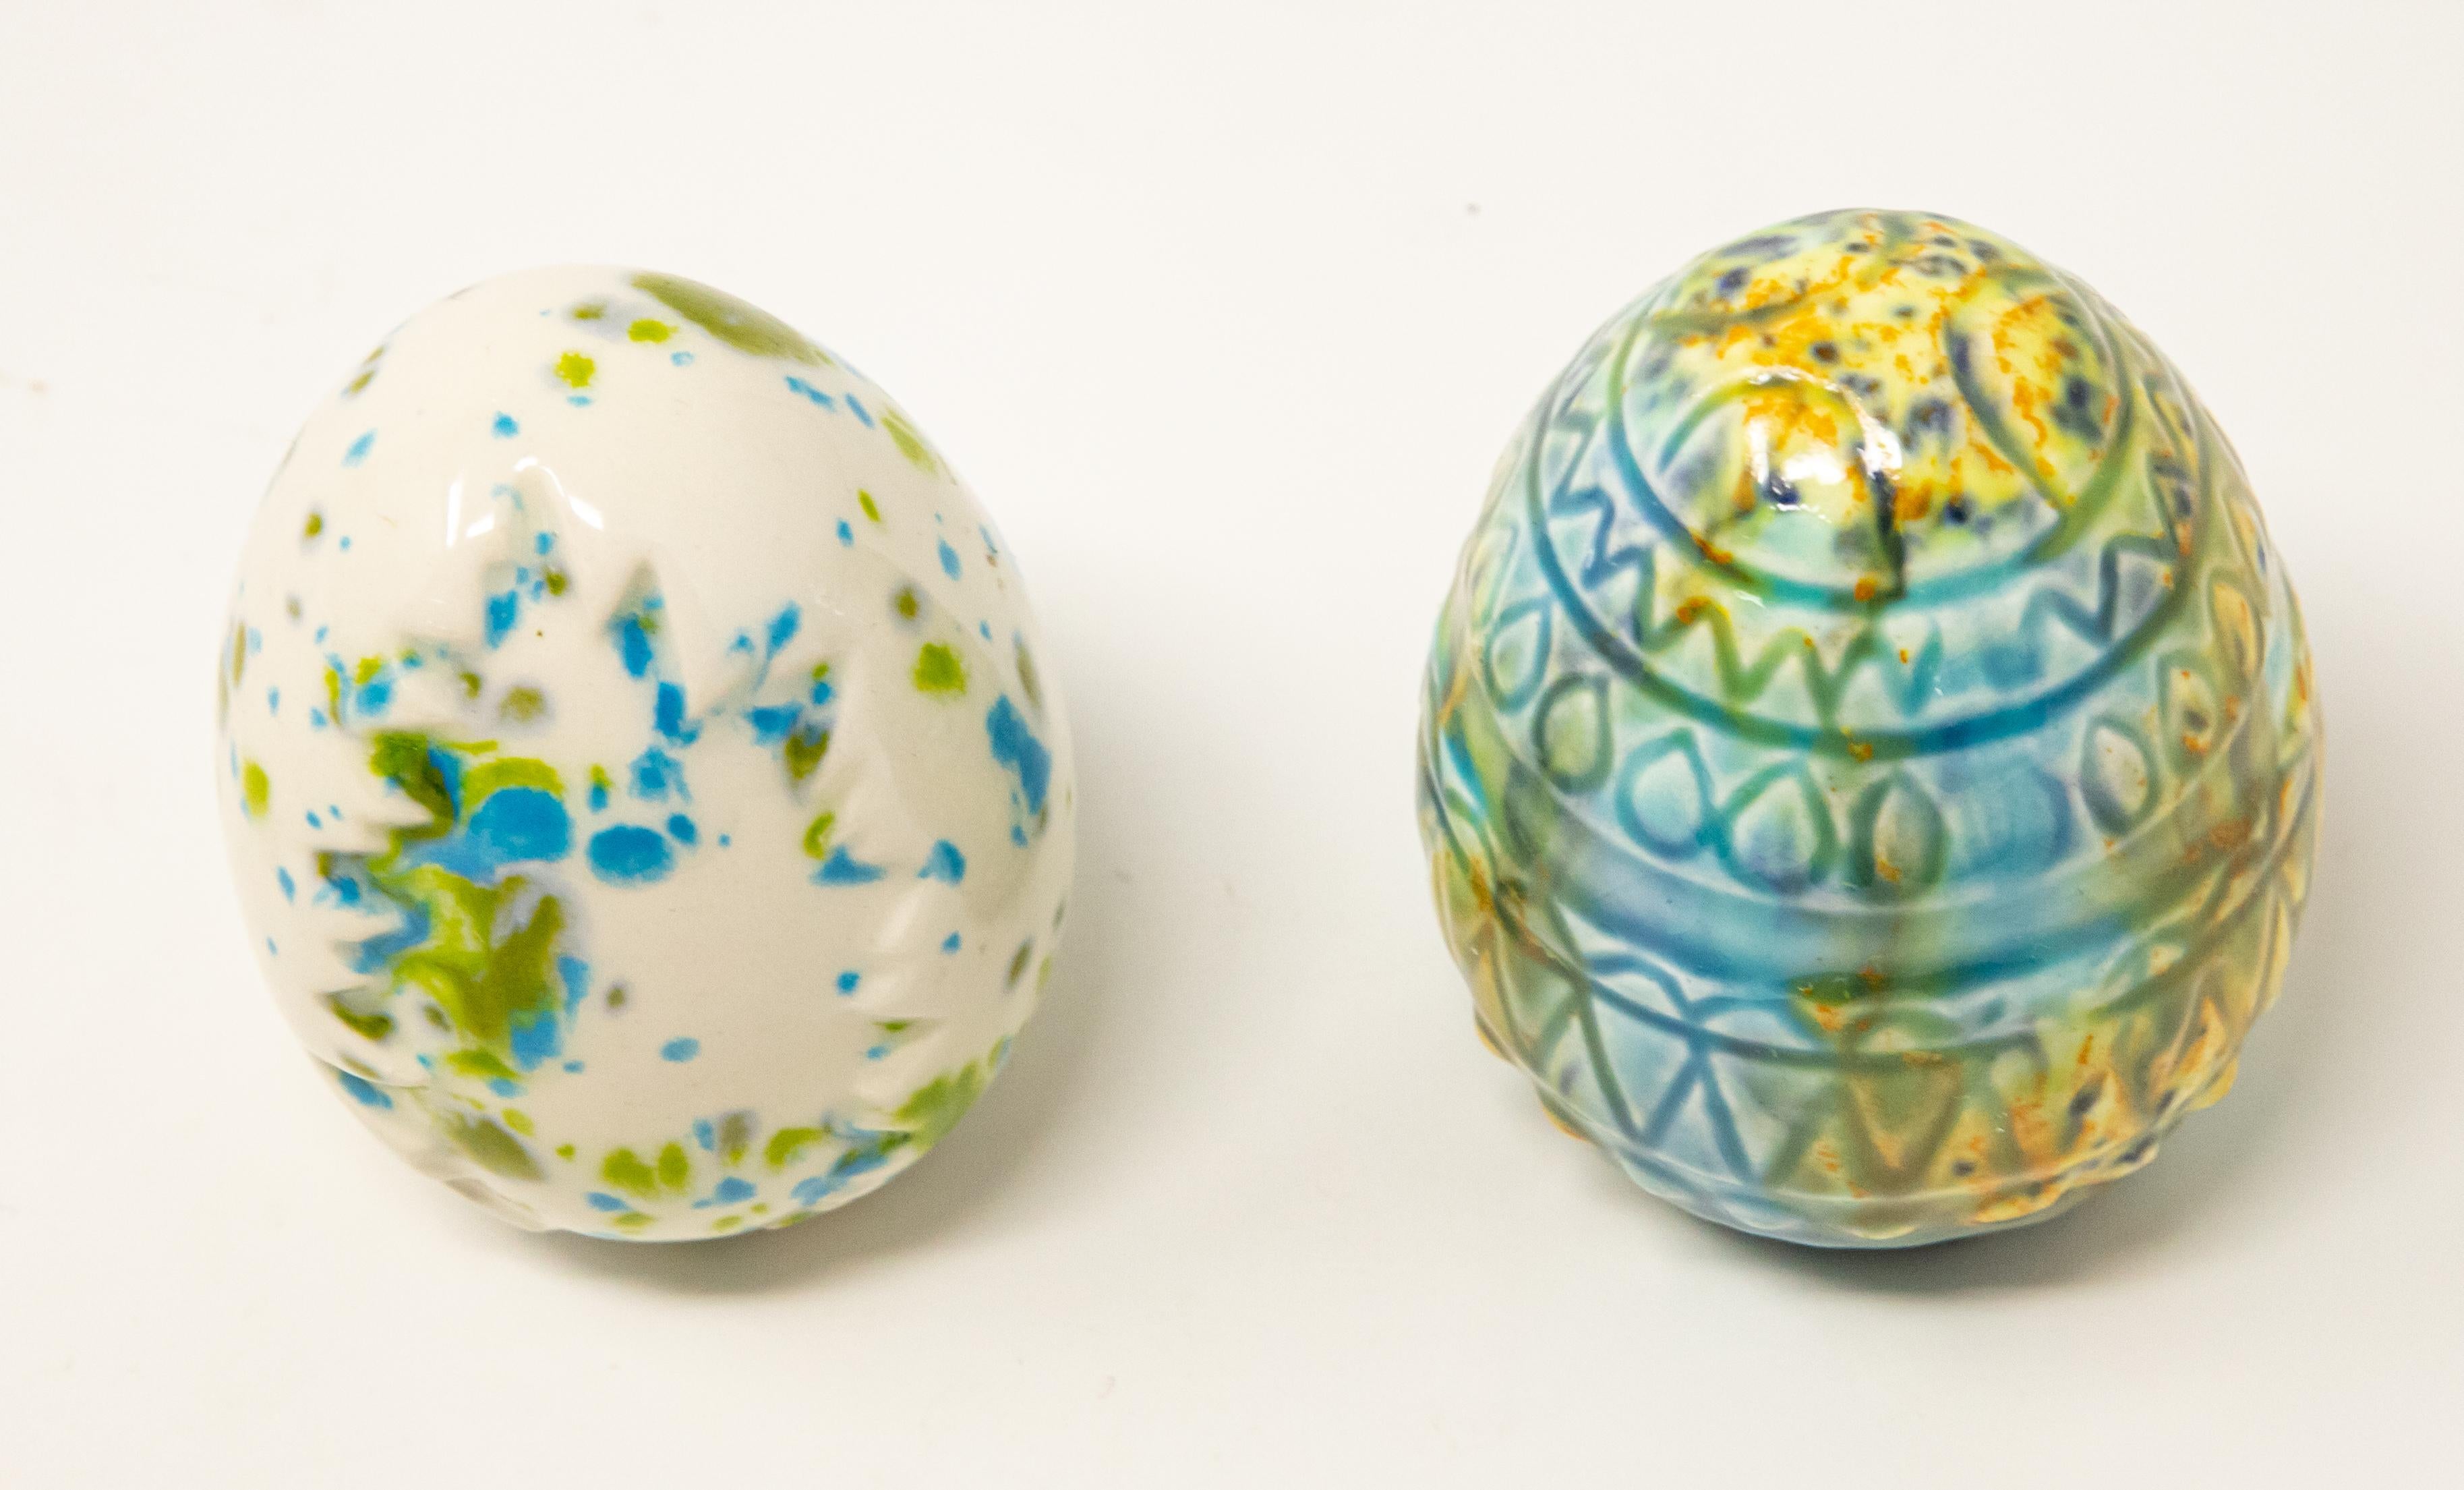 Offering a pair of ceramic glazed eggs. One egg is ivory, with blue and green spots with a tree stamped into it. The other is mostly blues with accents of green and yellow, and has geometric designs around the sides.